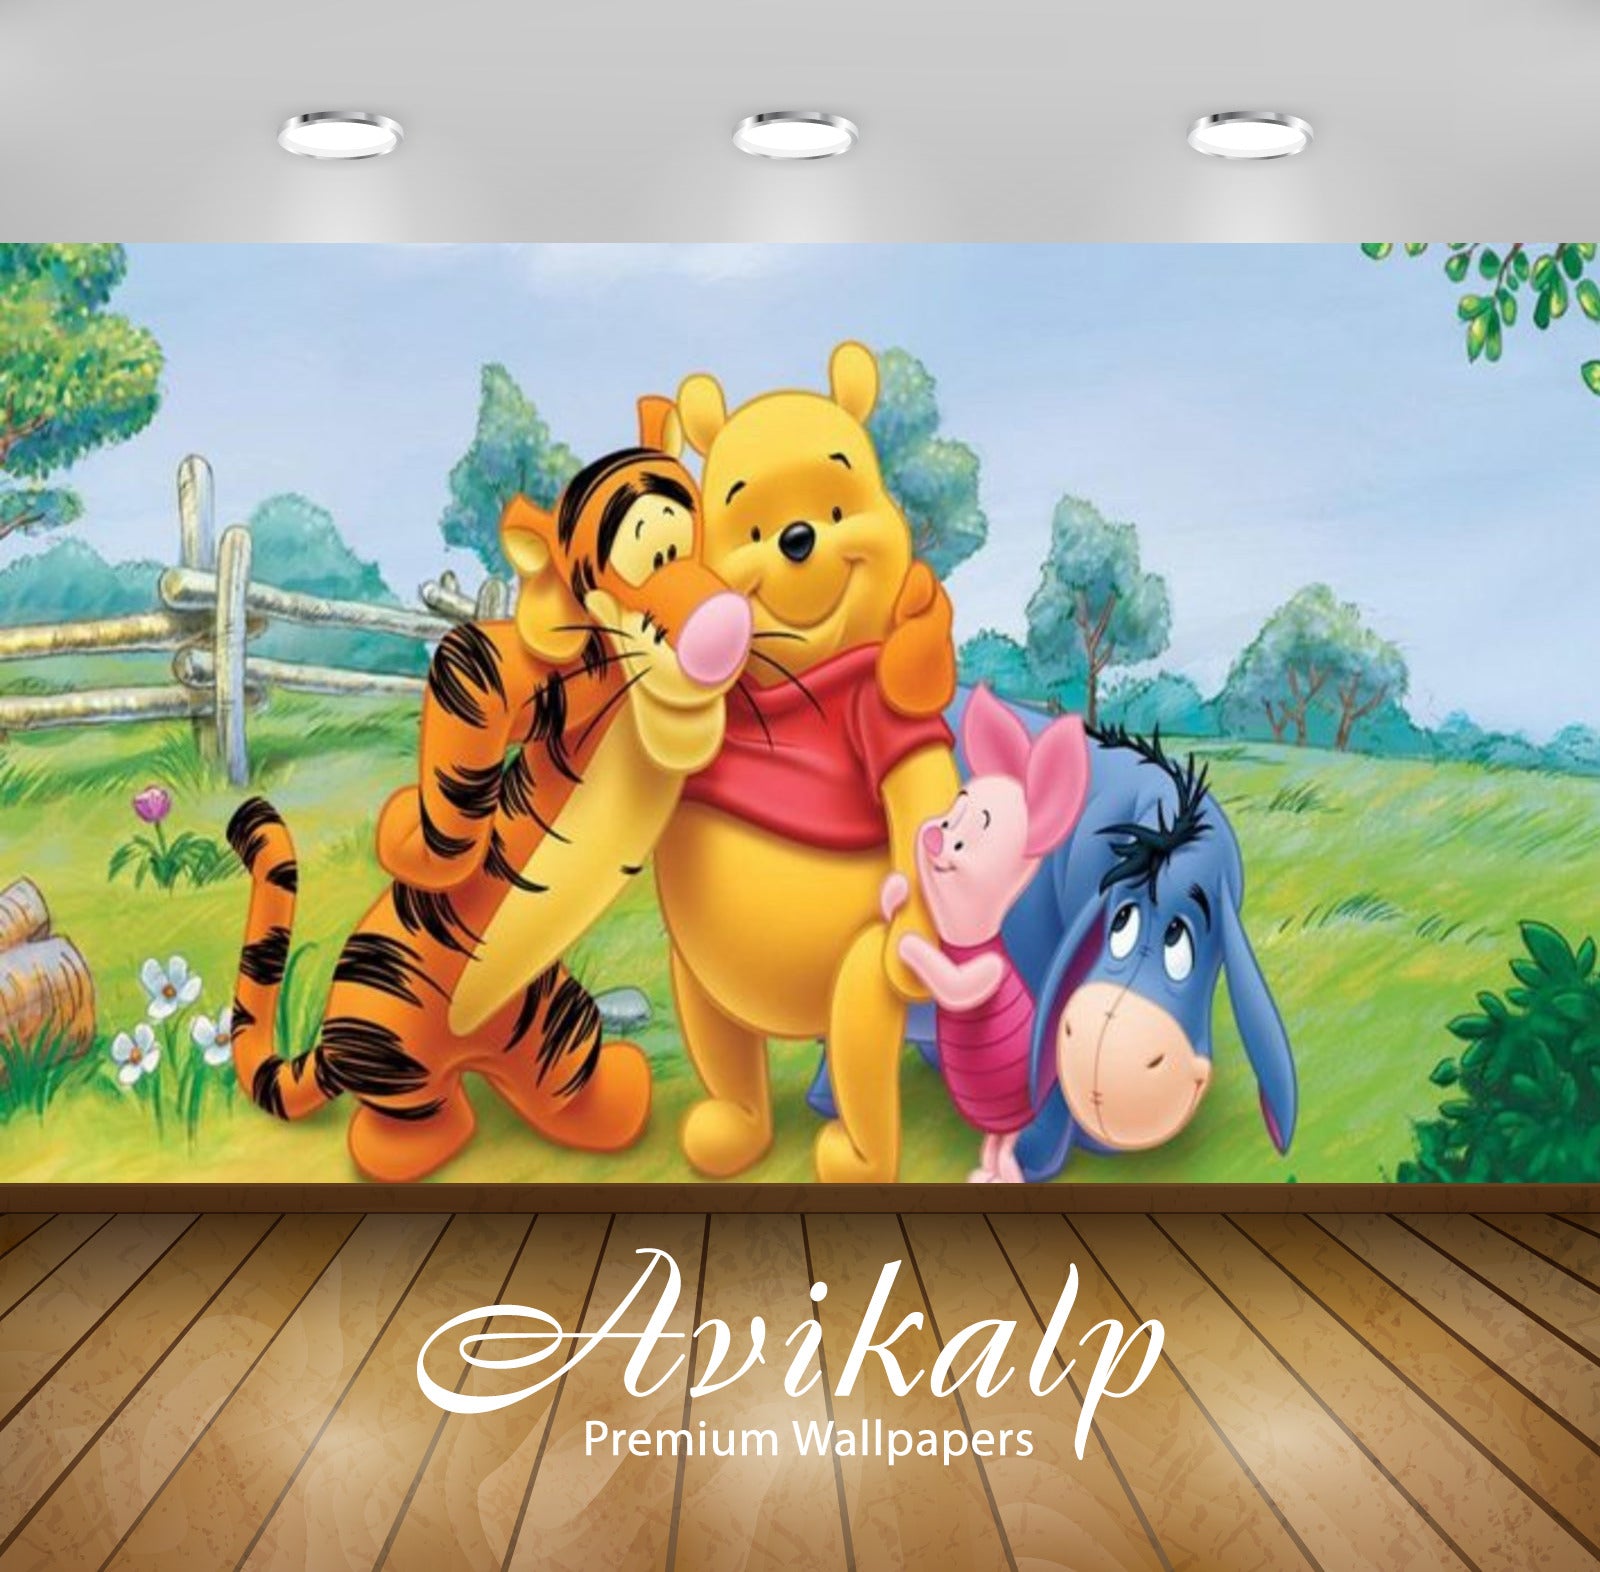 Avikalp Exclusive Awi2355 Winnie the Pooh Tigger Piglet Eeyore Full HD Wallpapers for Living room, H